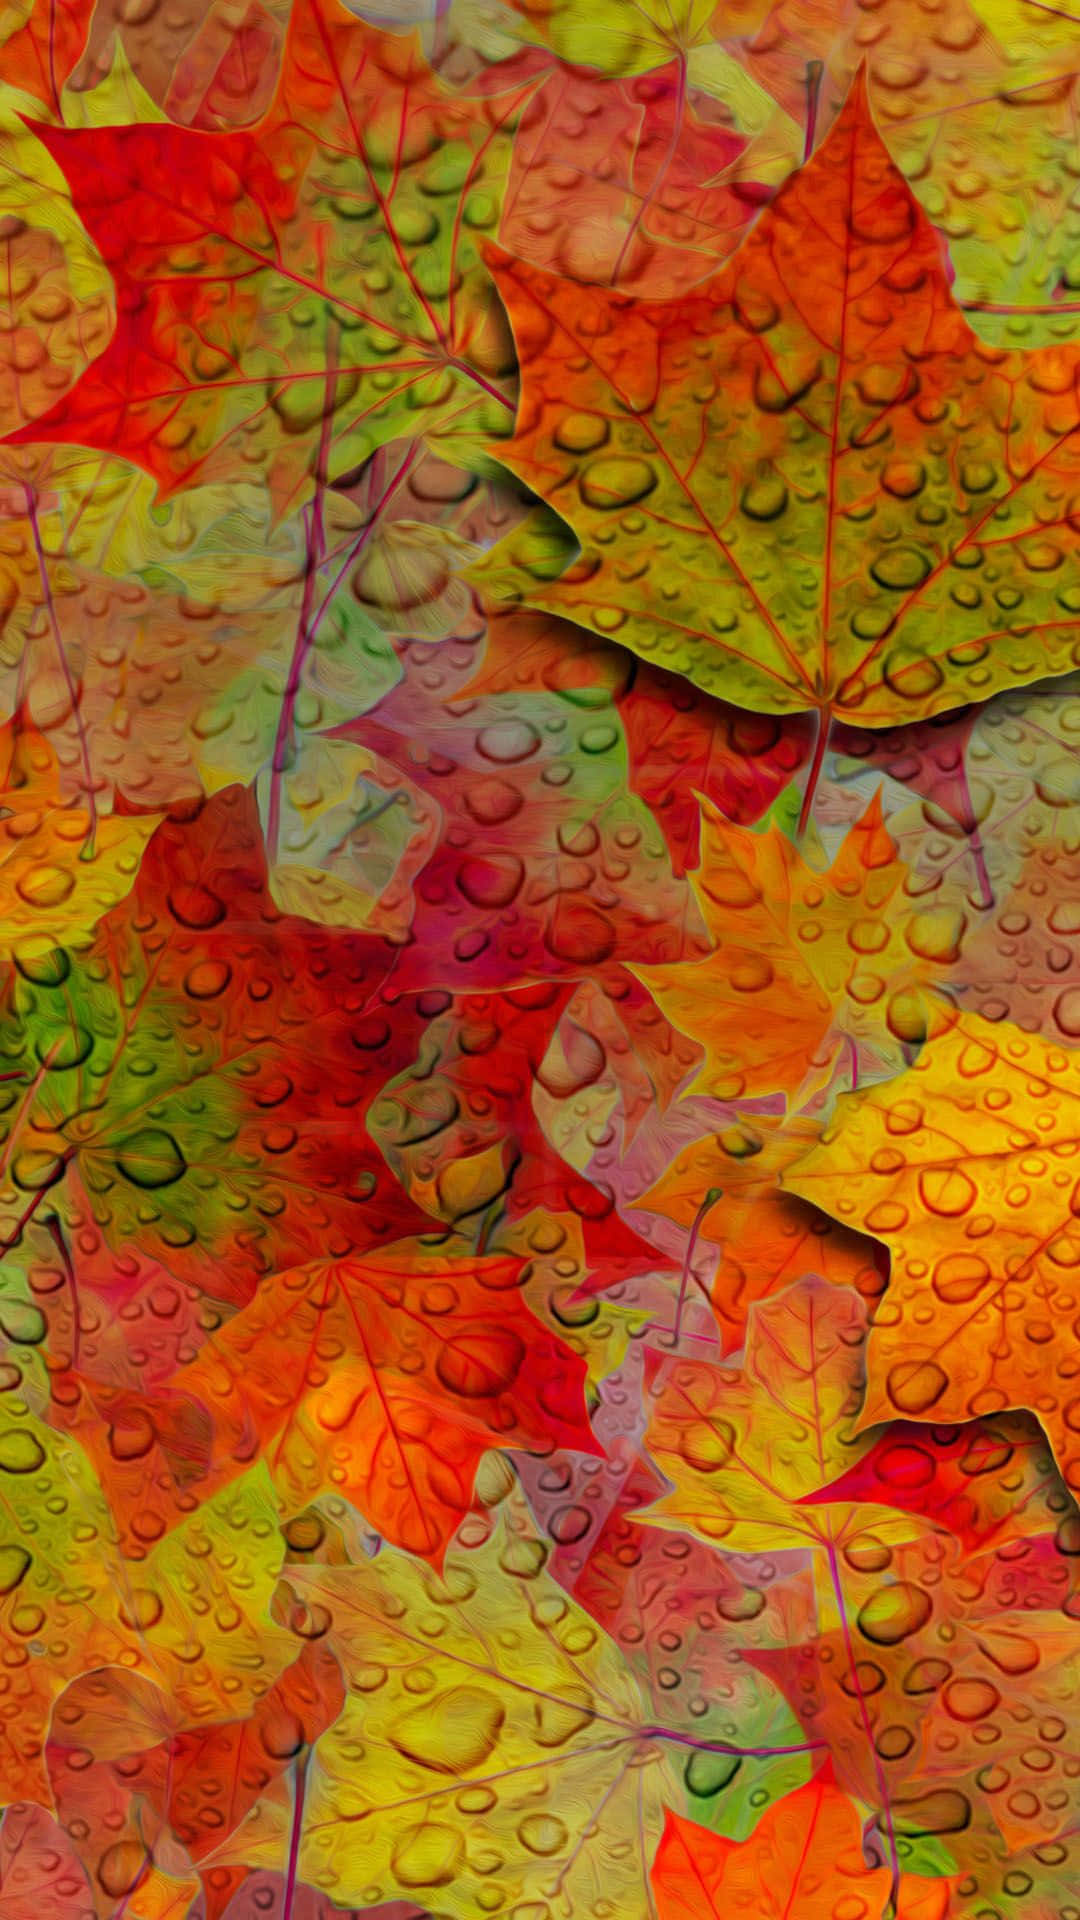 Autumn Iphone 6 Plus With Droplets On Leaves Wallpaper